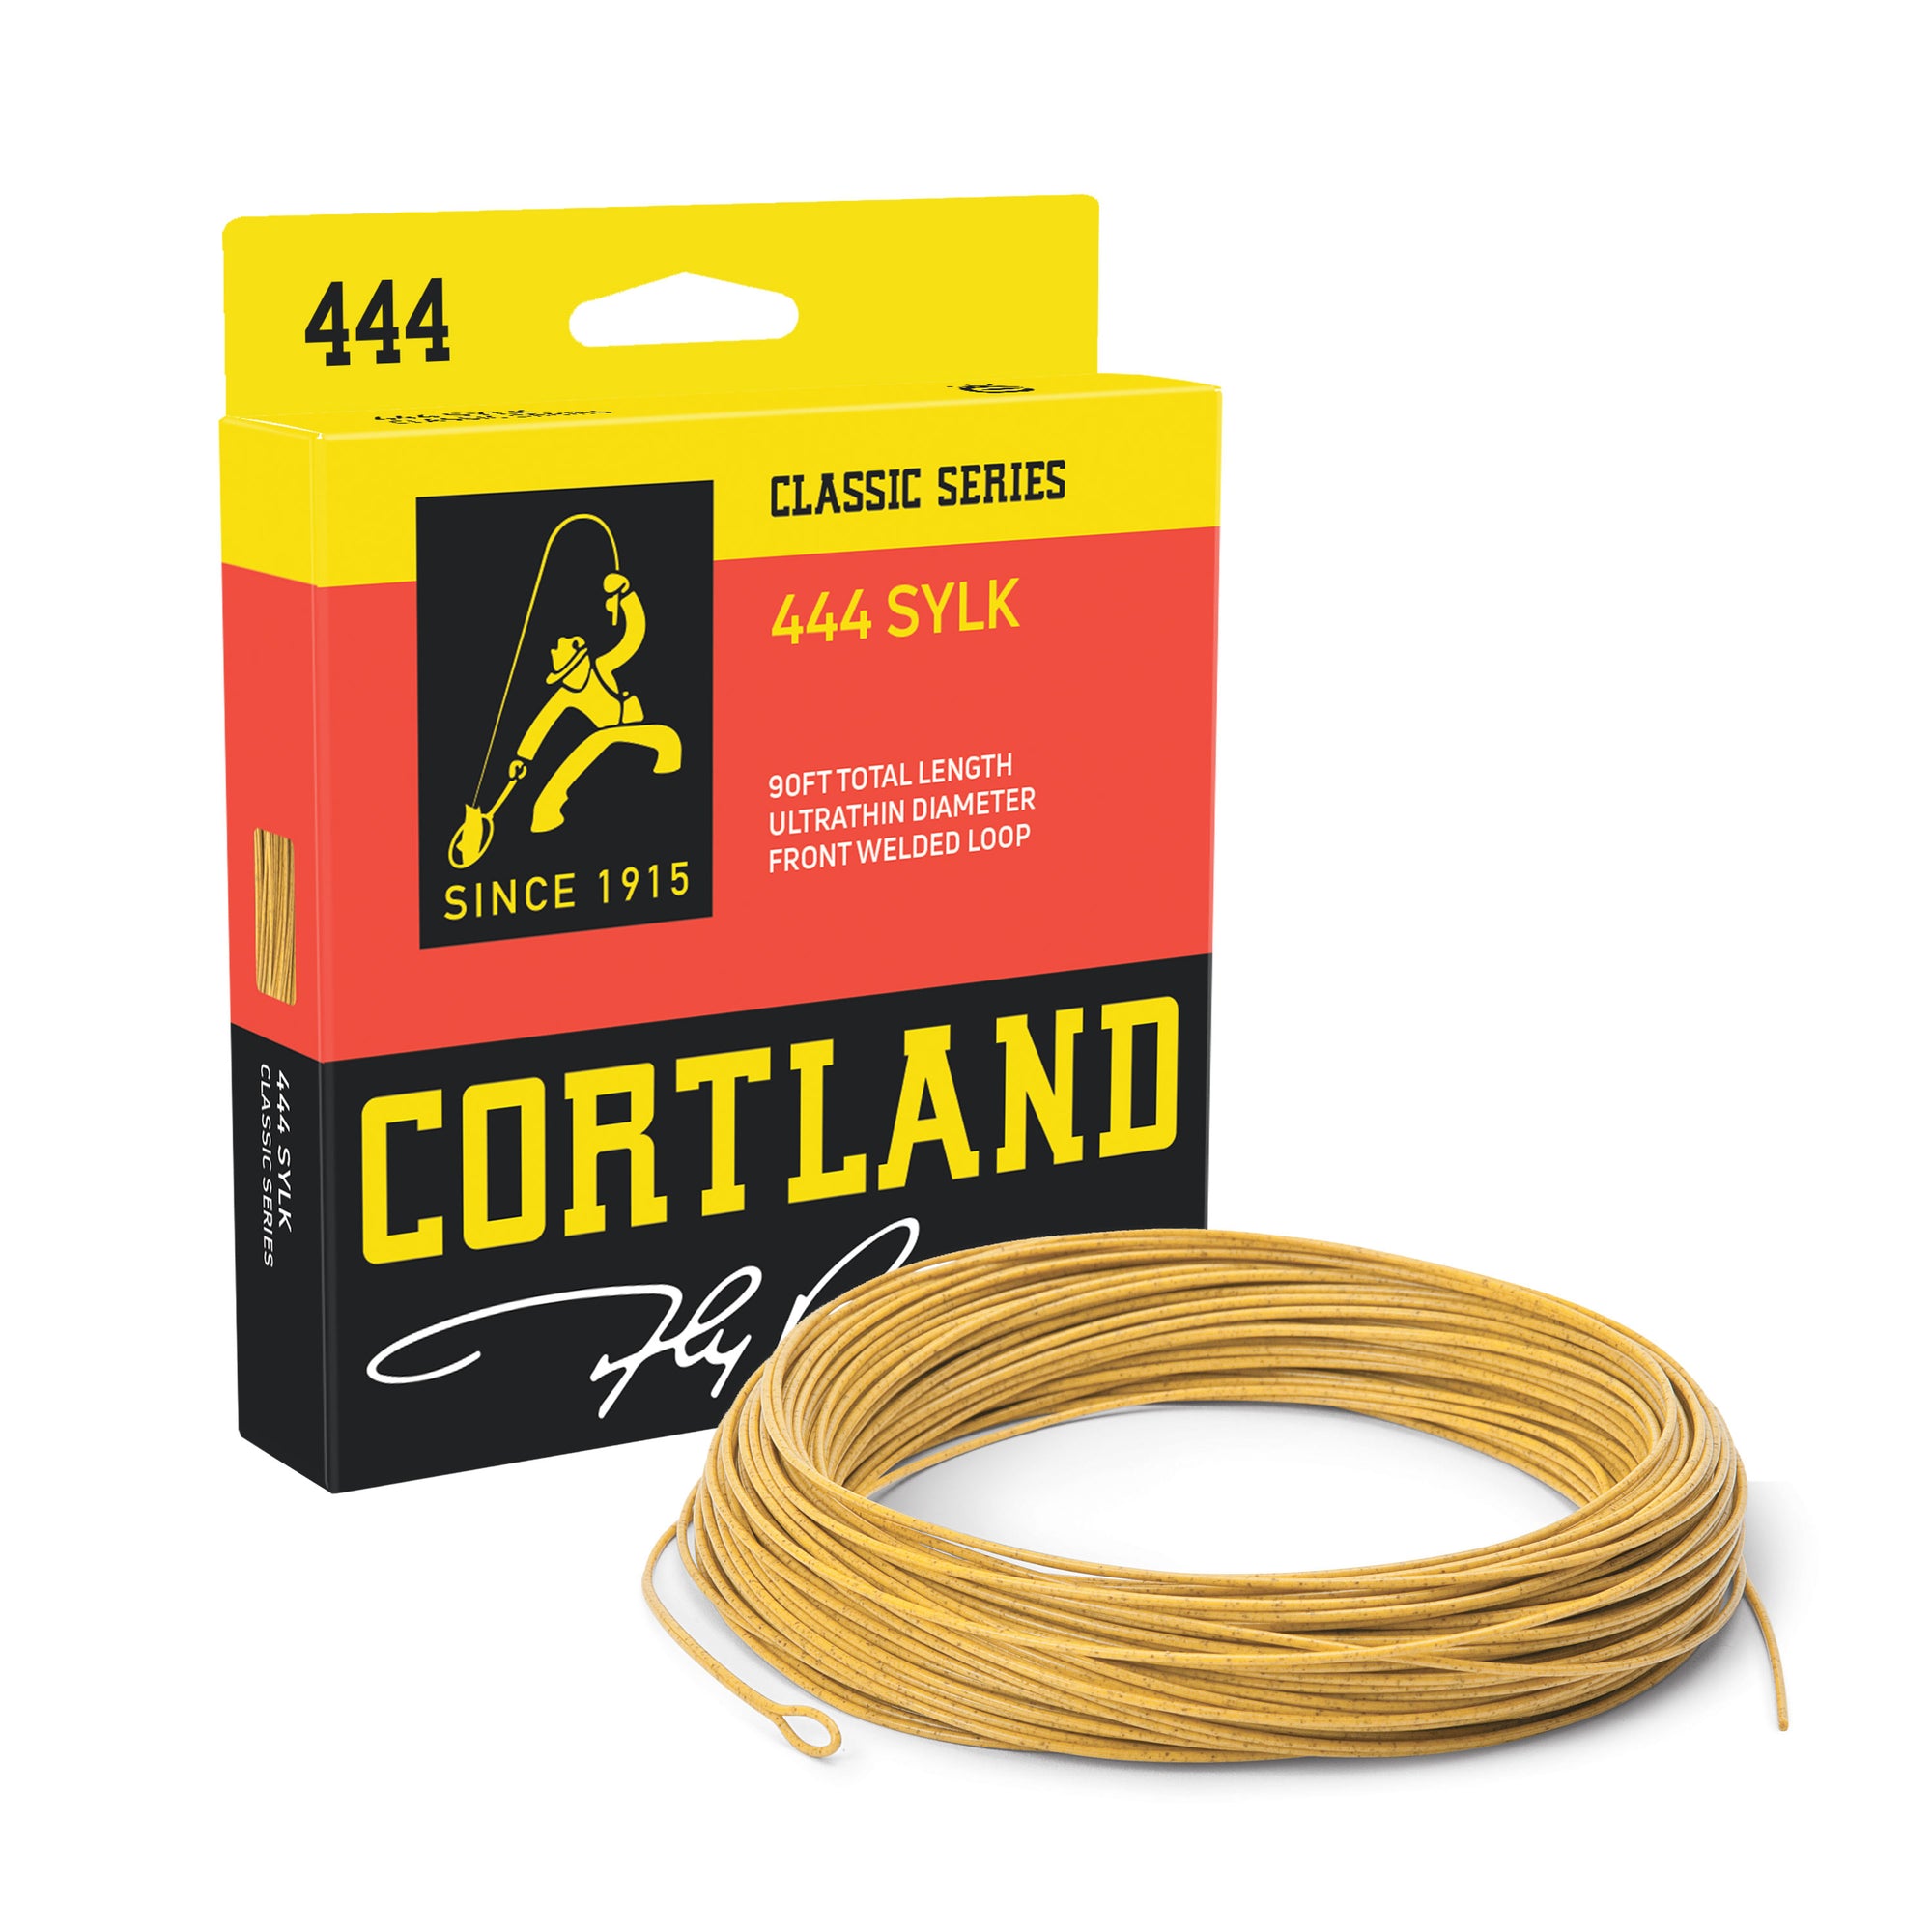 Cortland Micron Fly Line Backing 30 lb 250 yds - ALL COLORS - FREE SHIPPING  - AbuMaizar Dental Roots Clinic